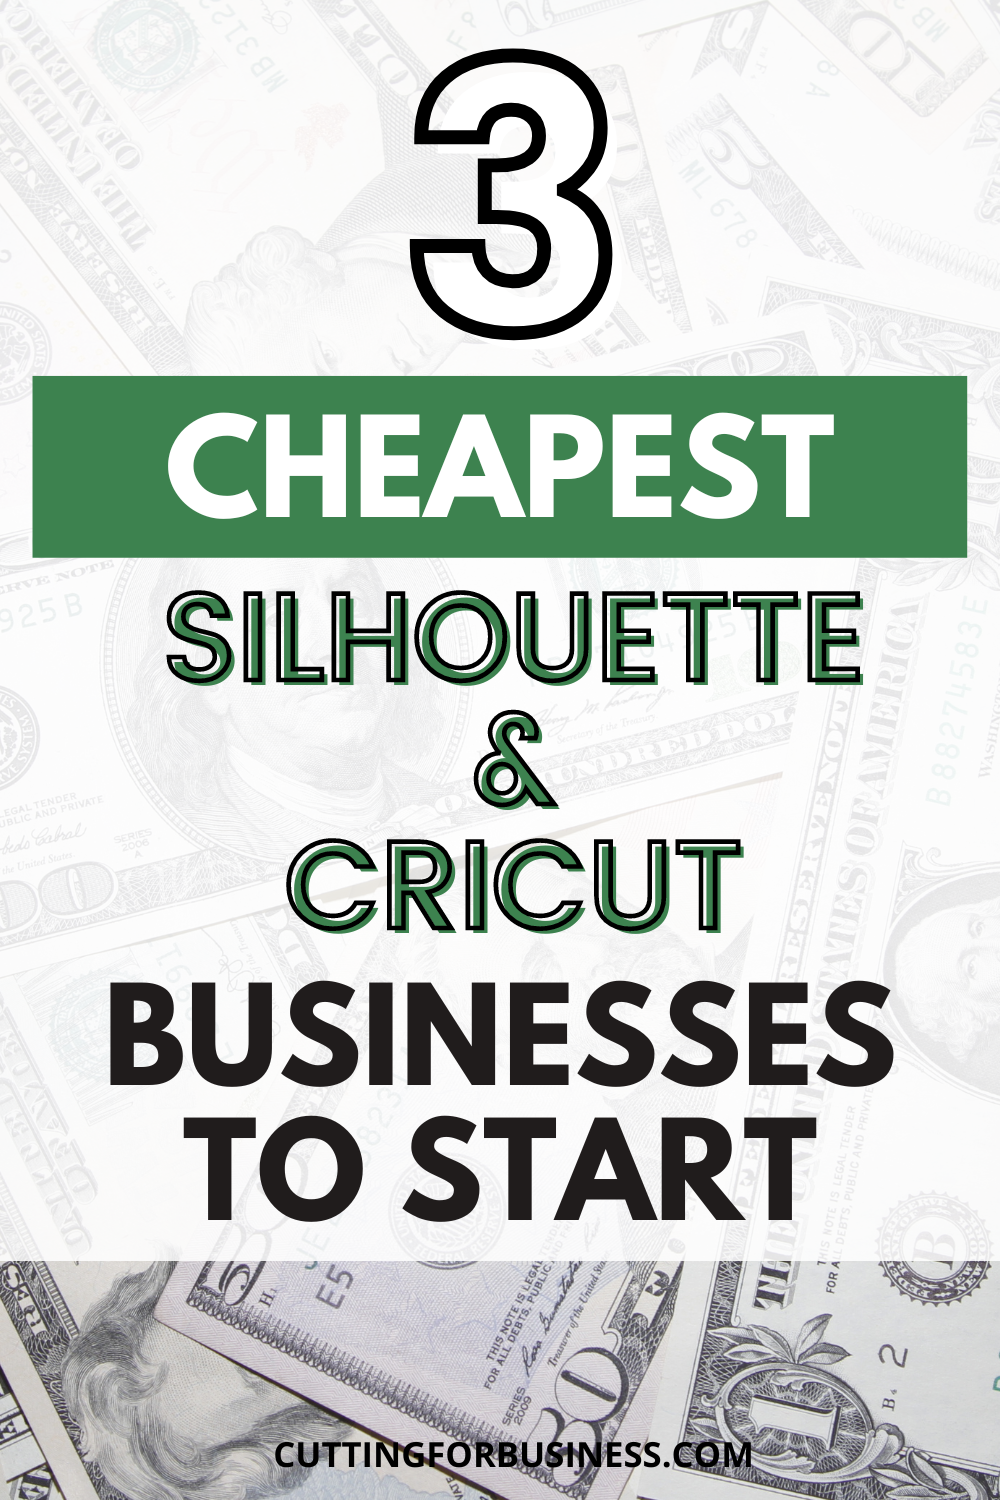 3 Cheapest Silhouette and Cricut Businesses to Start - cuttingforbusiness.com.